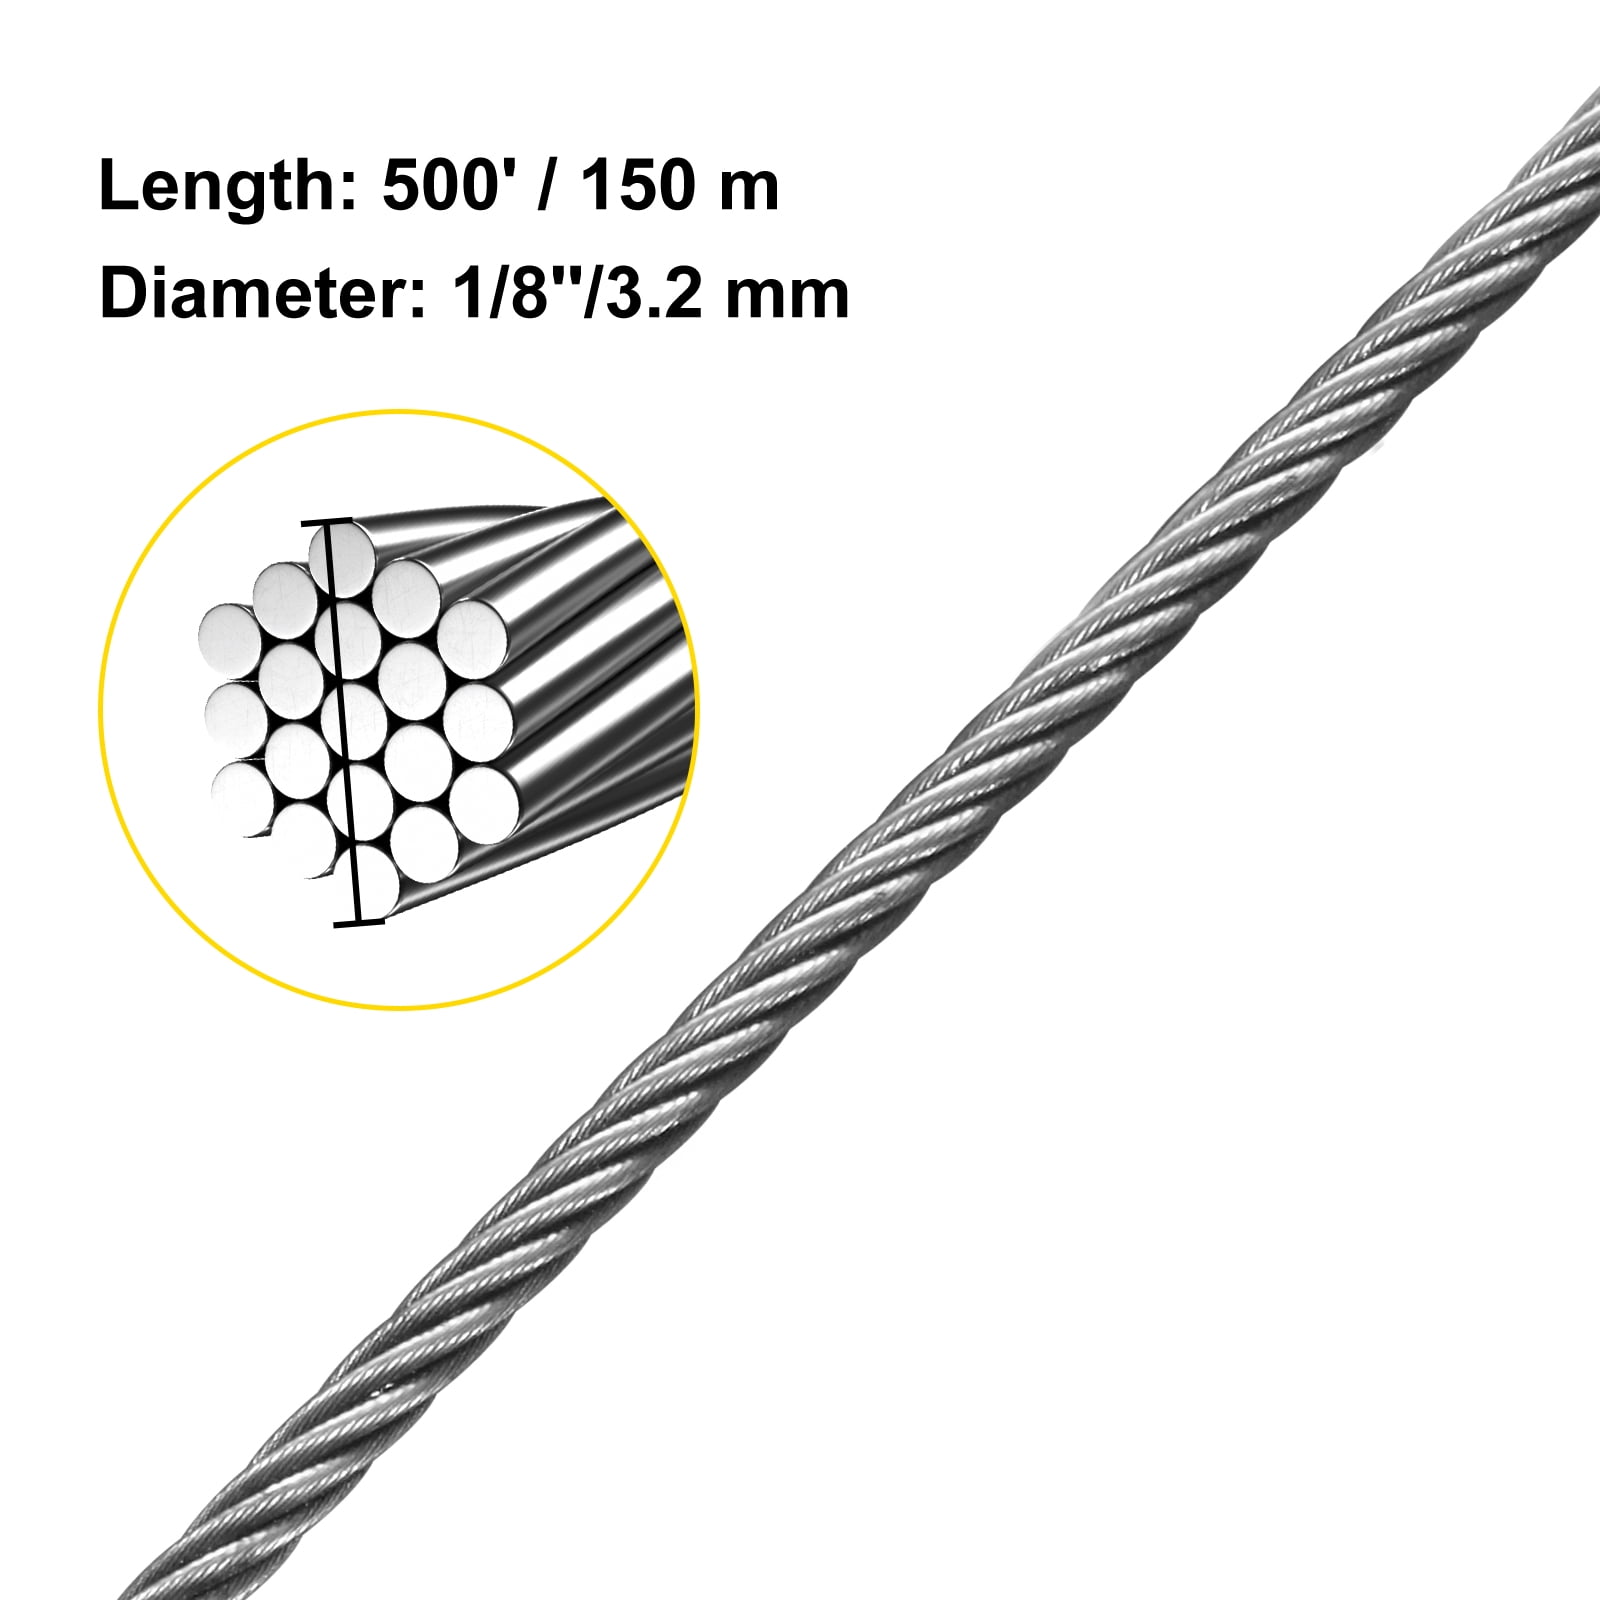 7x7 T316 Marin Grade 1/8 Inch Stainless Steel Wire Rope Aircraft Cable for Cable Railing Kit,Deck Stair Railing Hardware DIY Balustrade 220 Ft